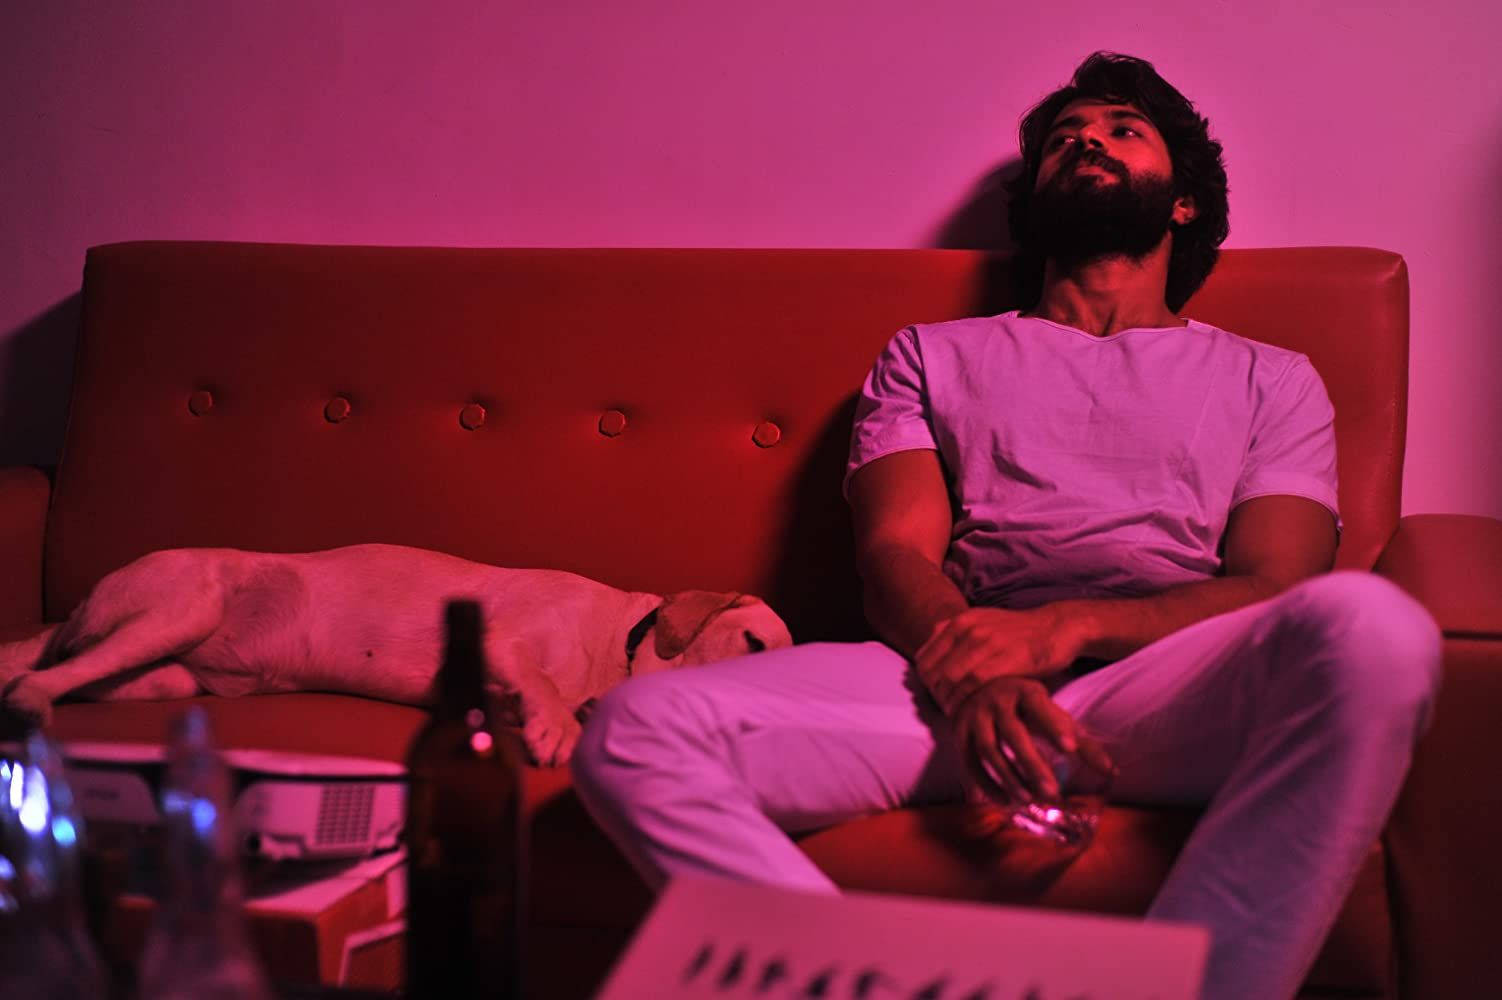 Striking portrait of Arjun Reddy from the acclaimed movie, illuminated in pink light Wallpaper